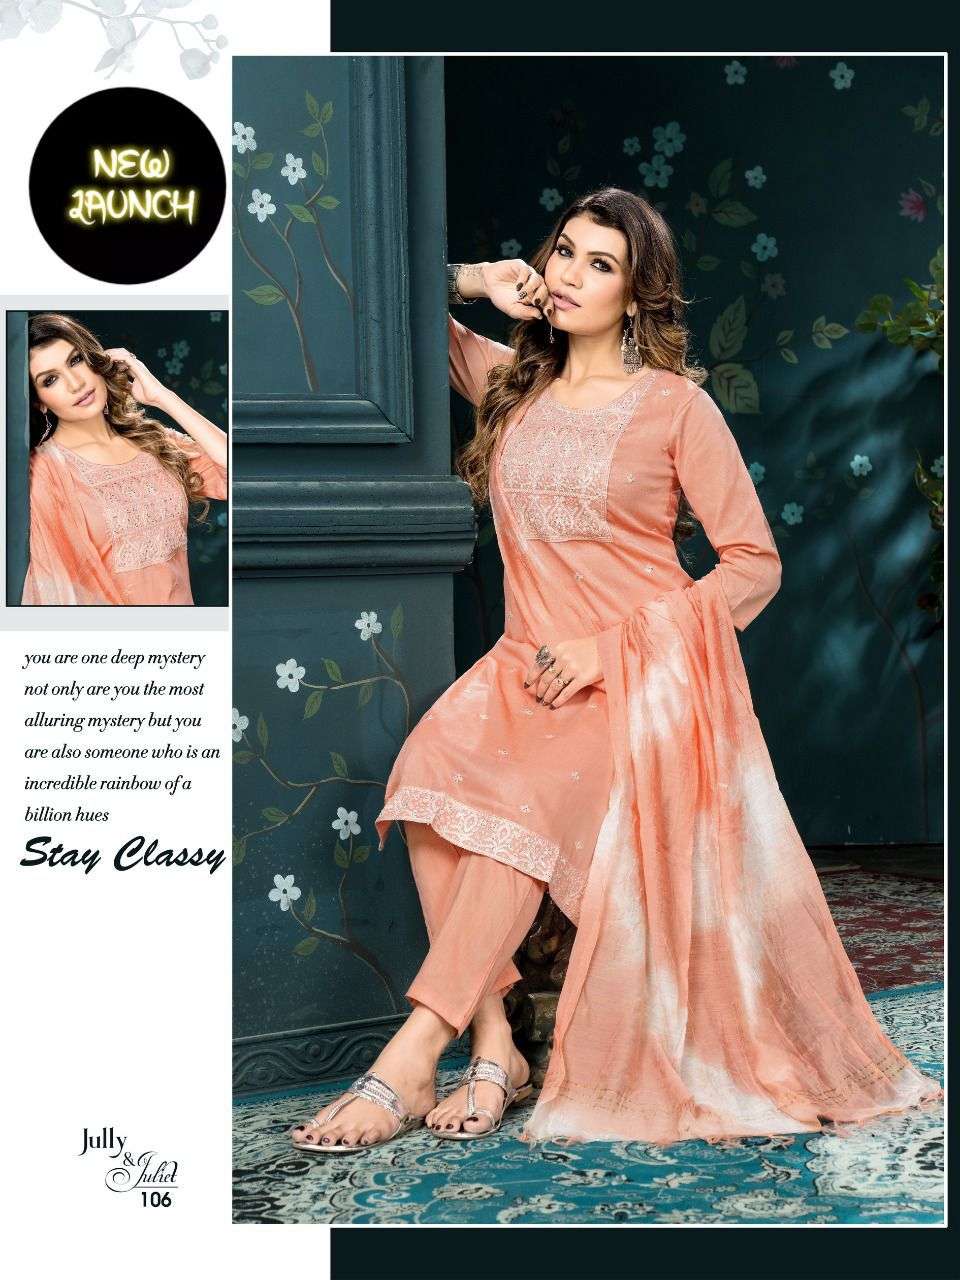 S3forever jully%20And%20Juliet fabric silk embroidery work white foil print kurti silk fabric fancy pant chiffon double dying dupatta 05 4 2022 10 15 16 21 52